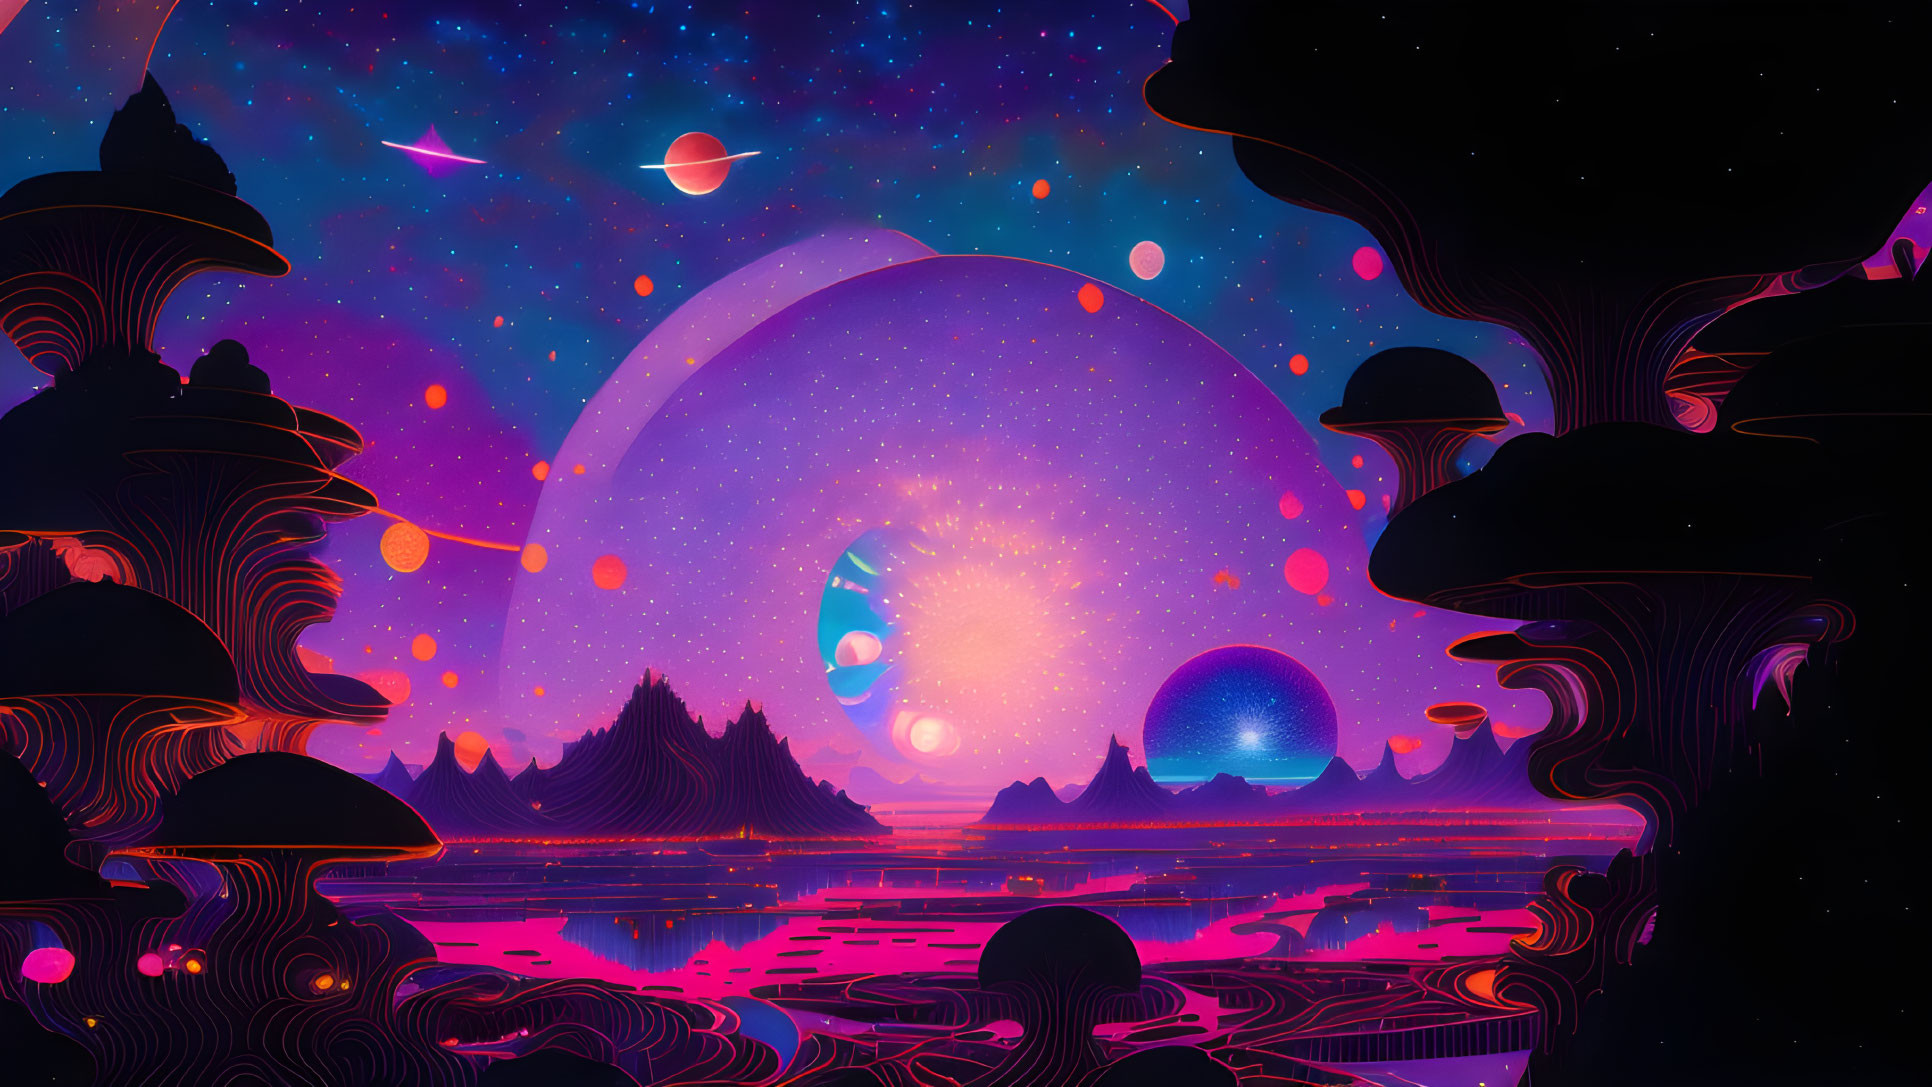 Colorful cosmic landscape with silhouette trees and planets.